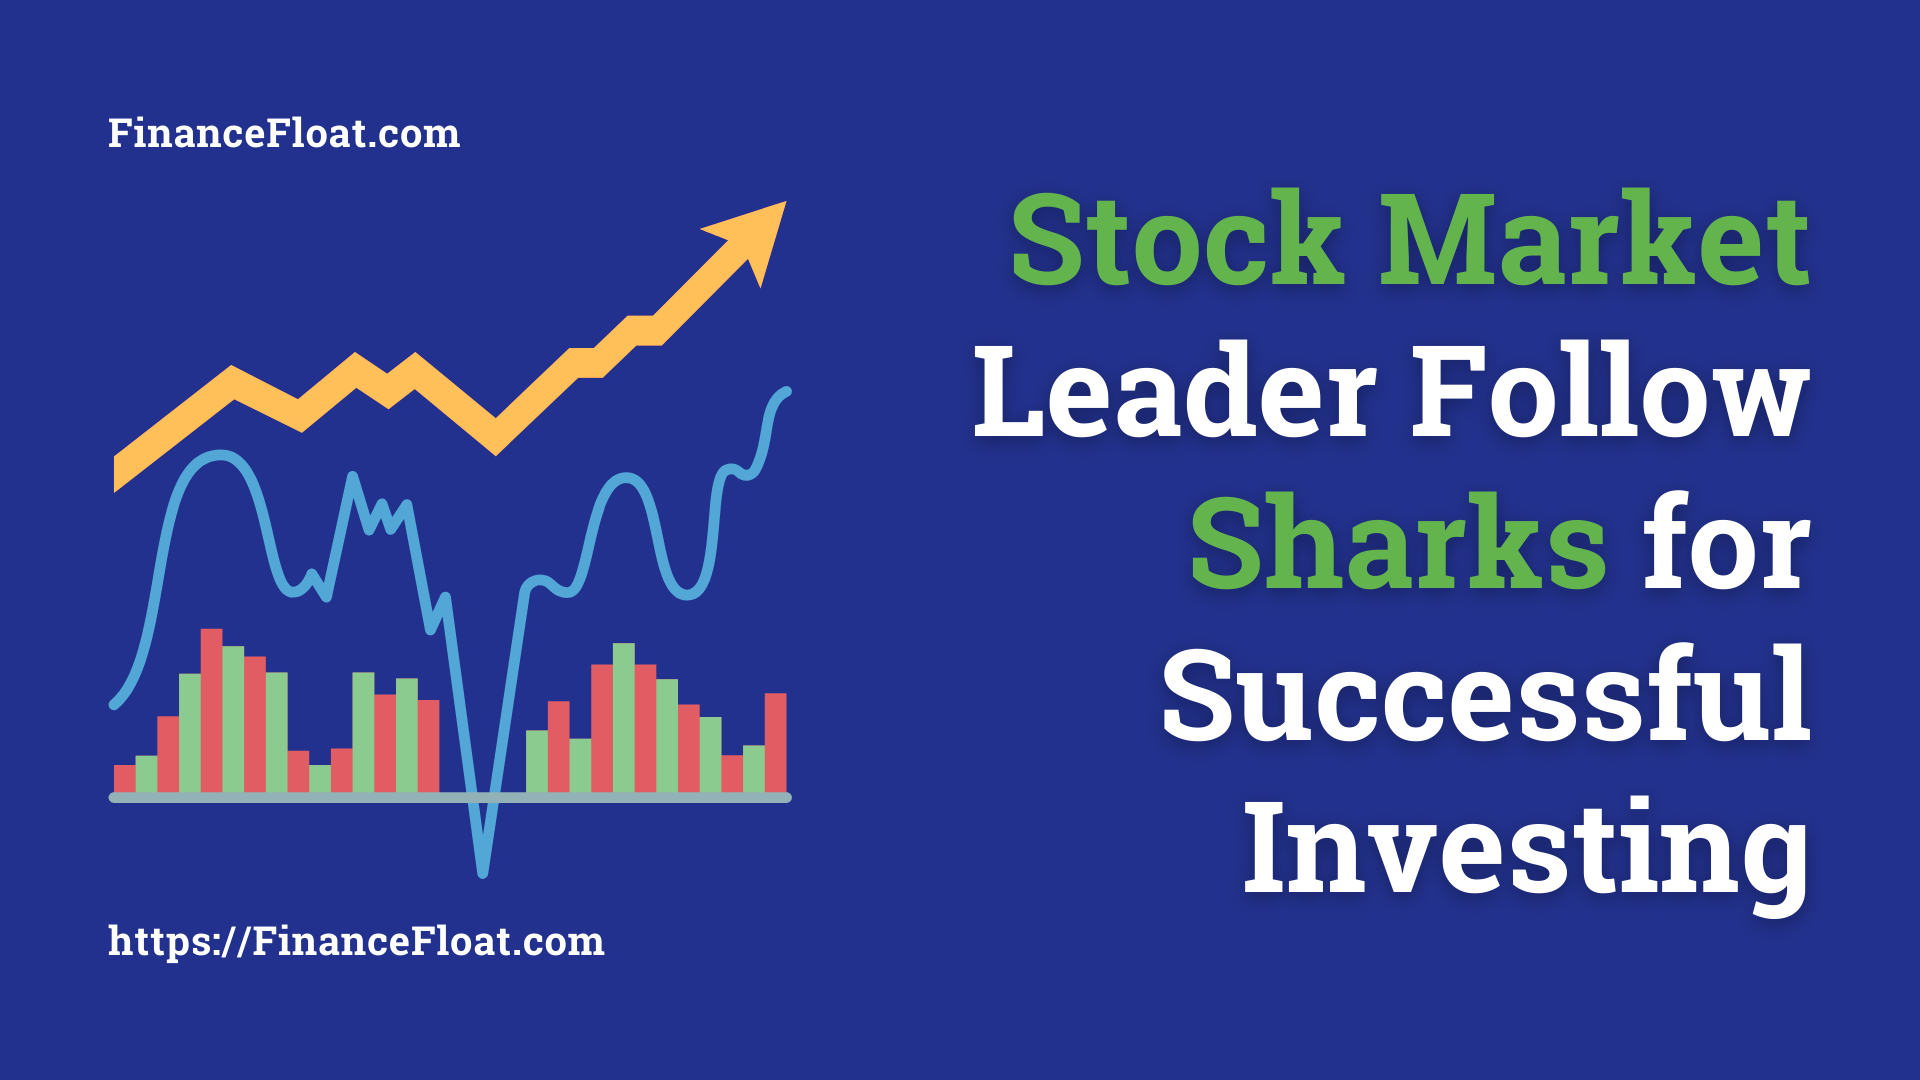 Stock Market Leader Follow Sharks for Successful Investing